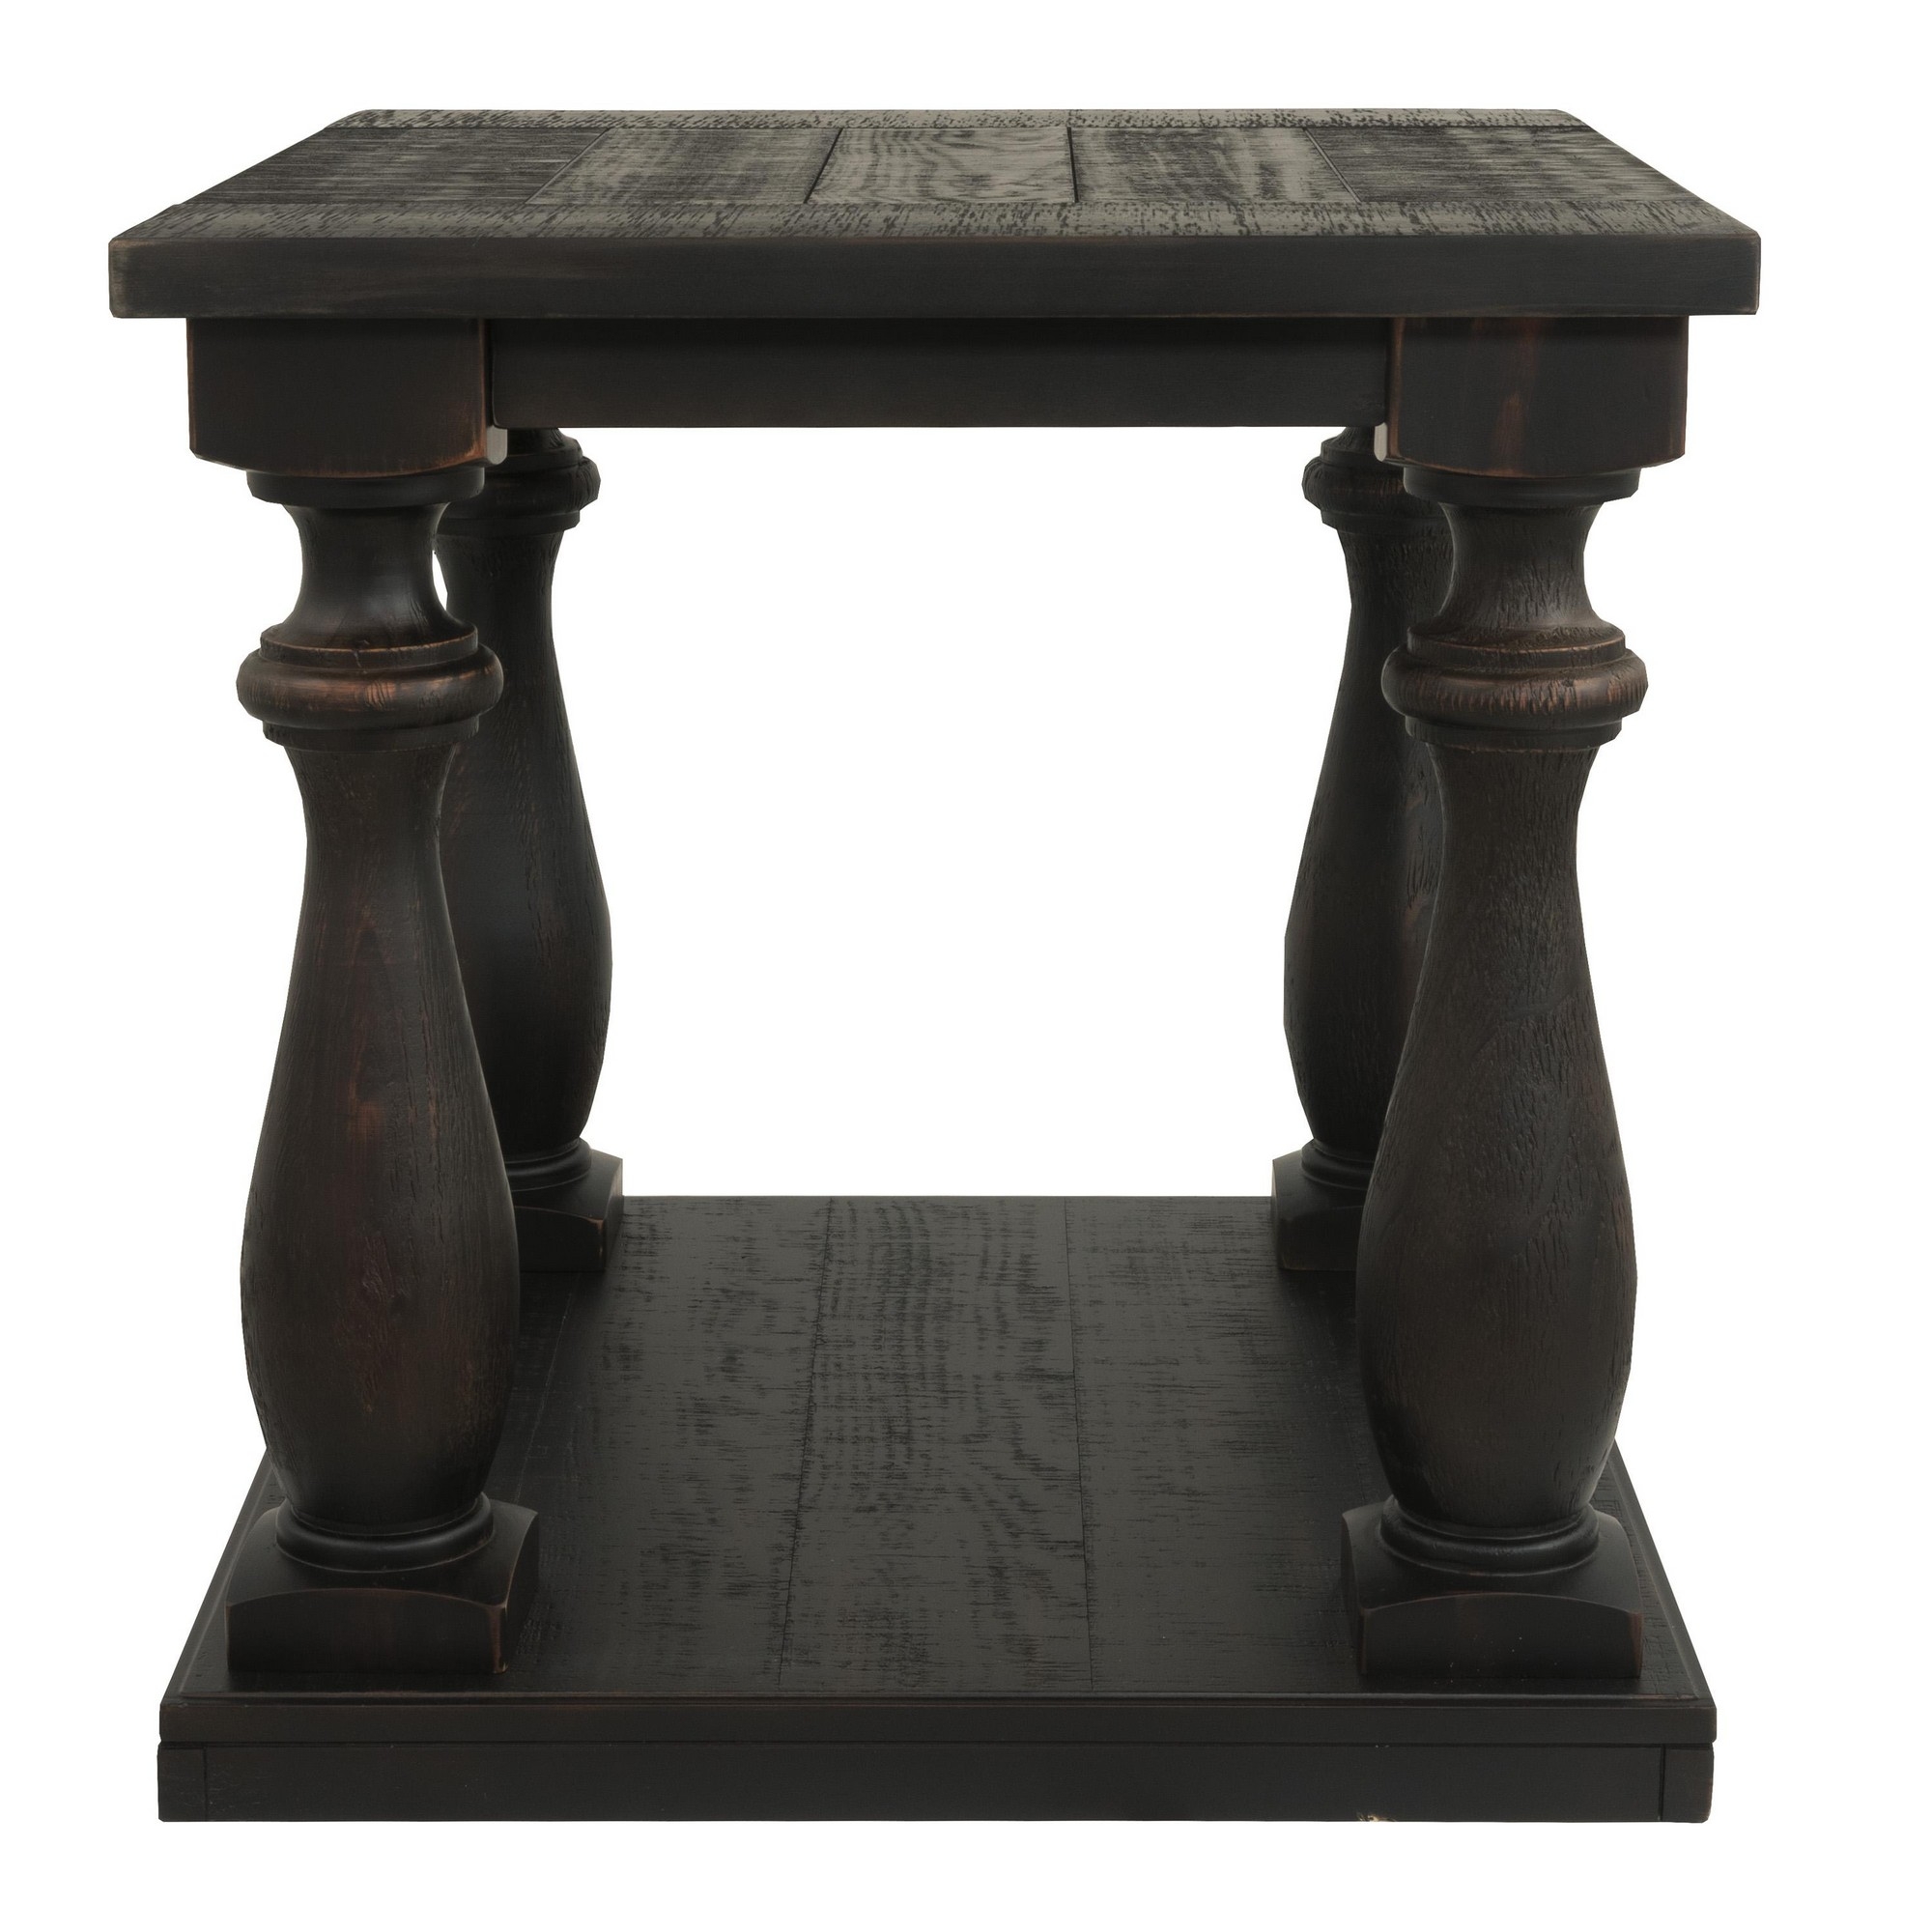 Plank Style Wooden End Table With Turned Legs And Open Bottom Shelf, Black- Saltoro Sherpi